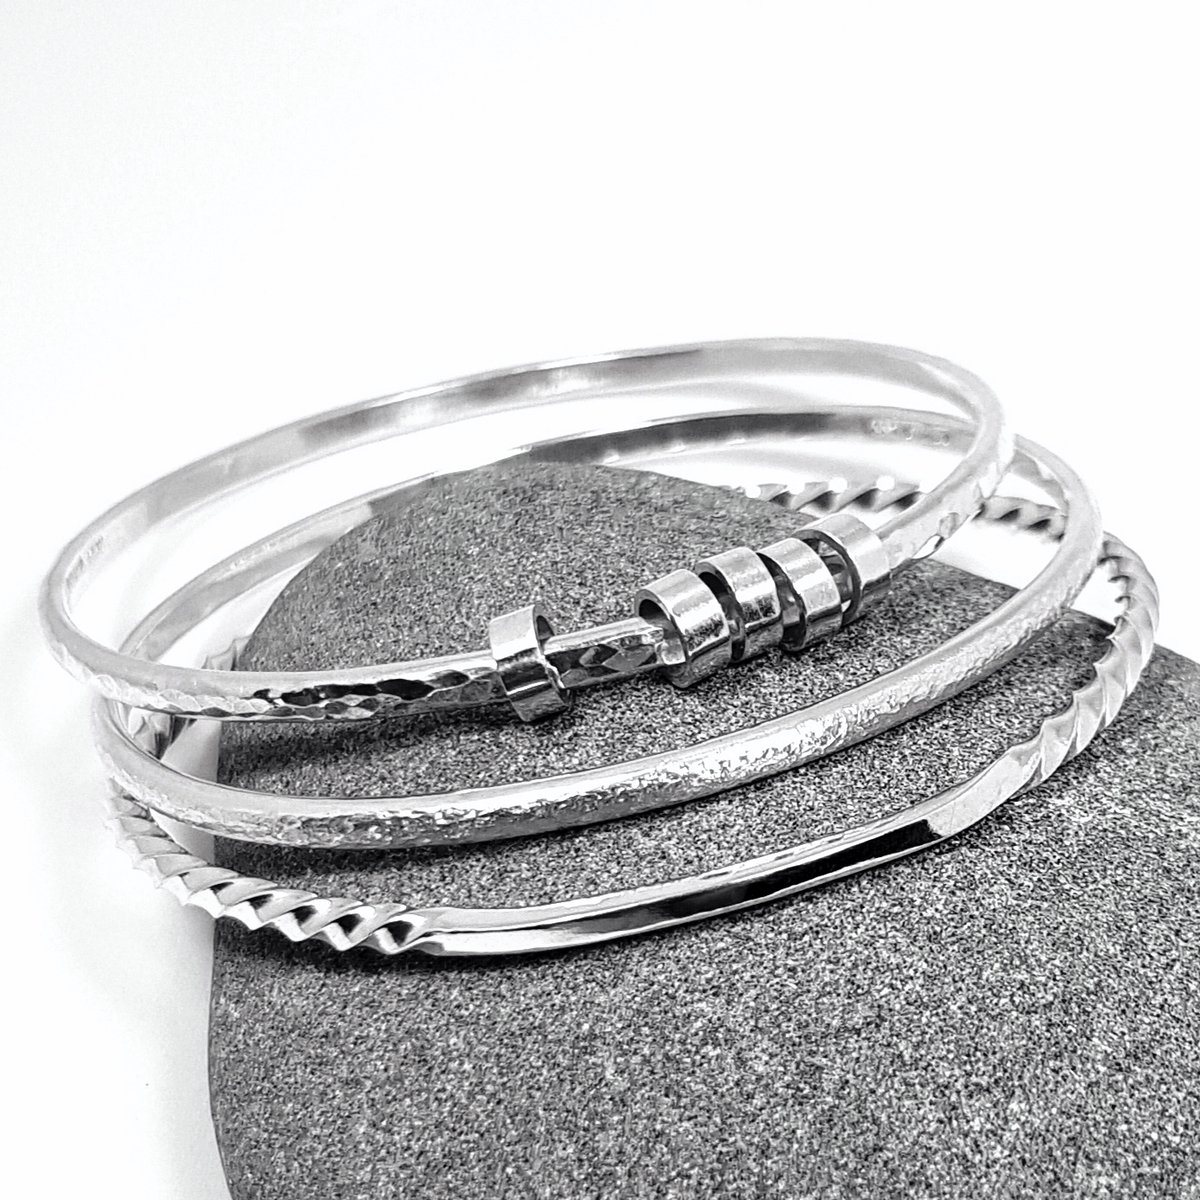 Image of Handmade Sterling Silver Bangle Bracelet, Solid Silver Twisted Wire Bangle